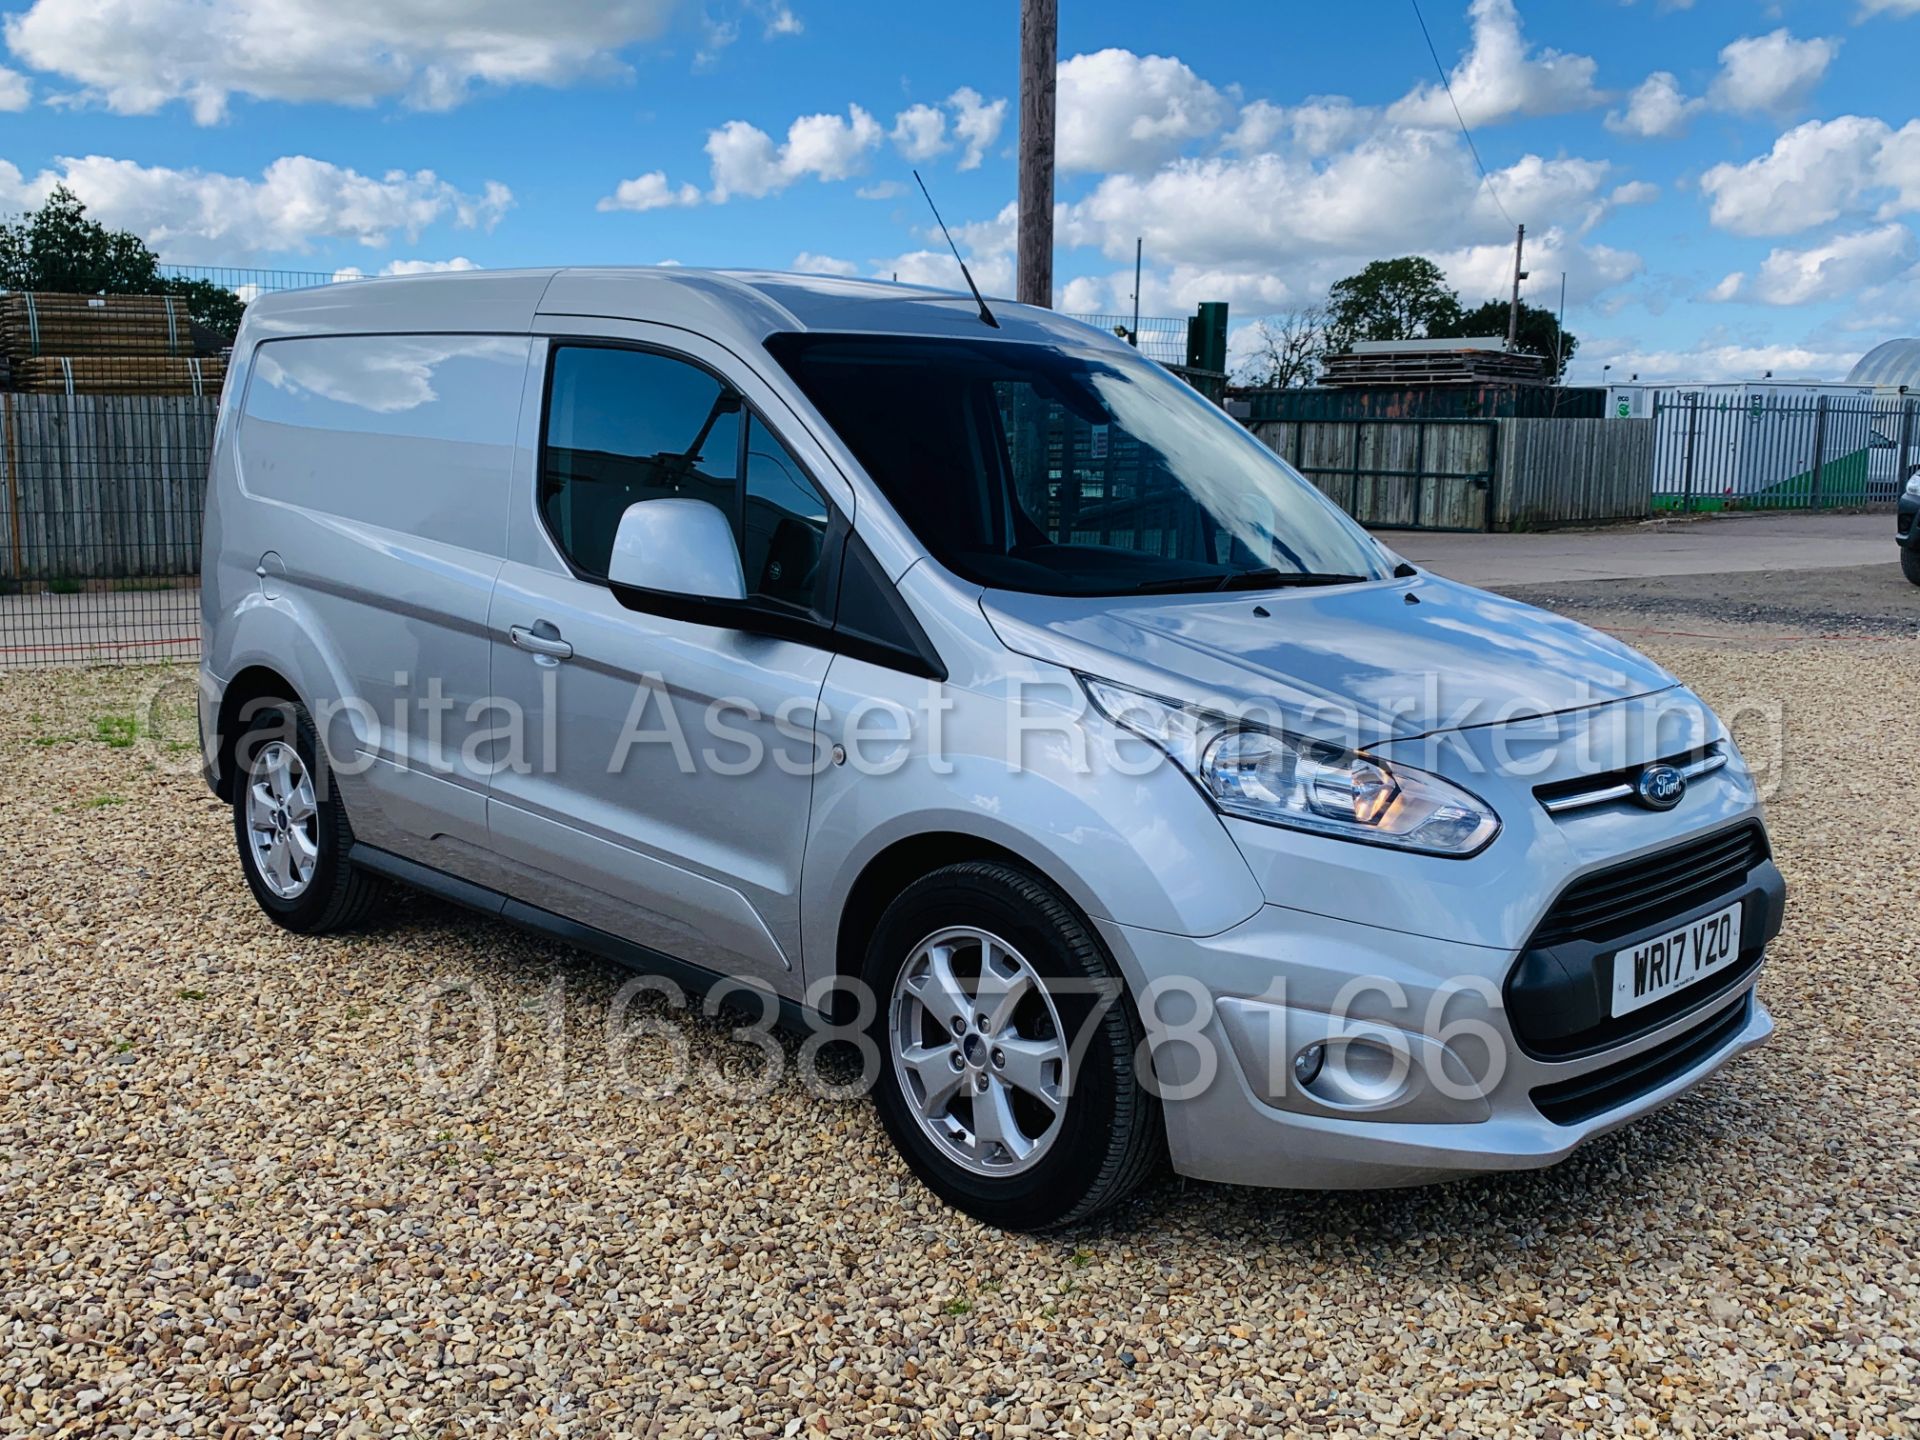 FORD TRANSIT CONNECT *LIMITED EDITION* SWB PANEL VAN (2017) '1.5 TDCI- 120 BHP - 6 SPEED' *TOP SPEC*